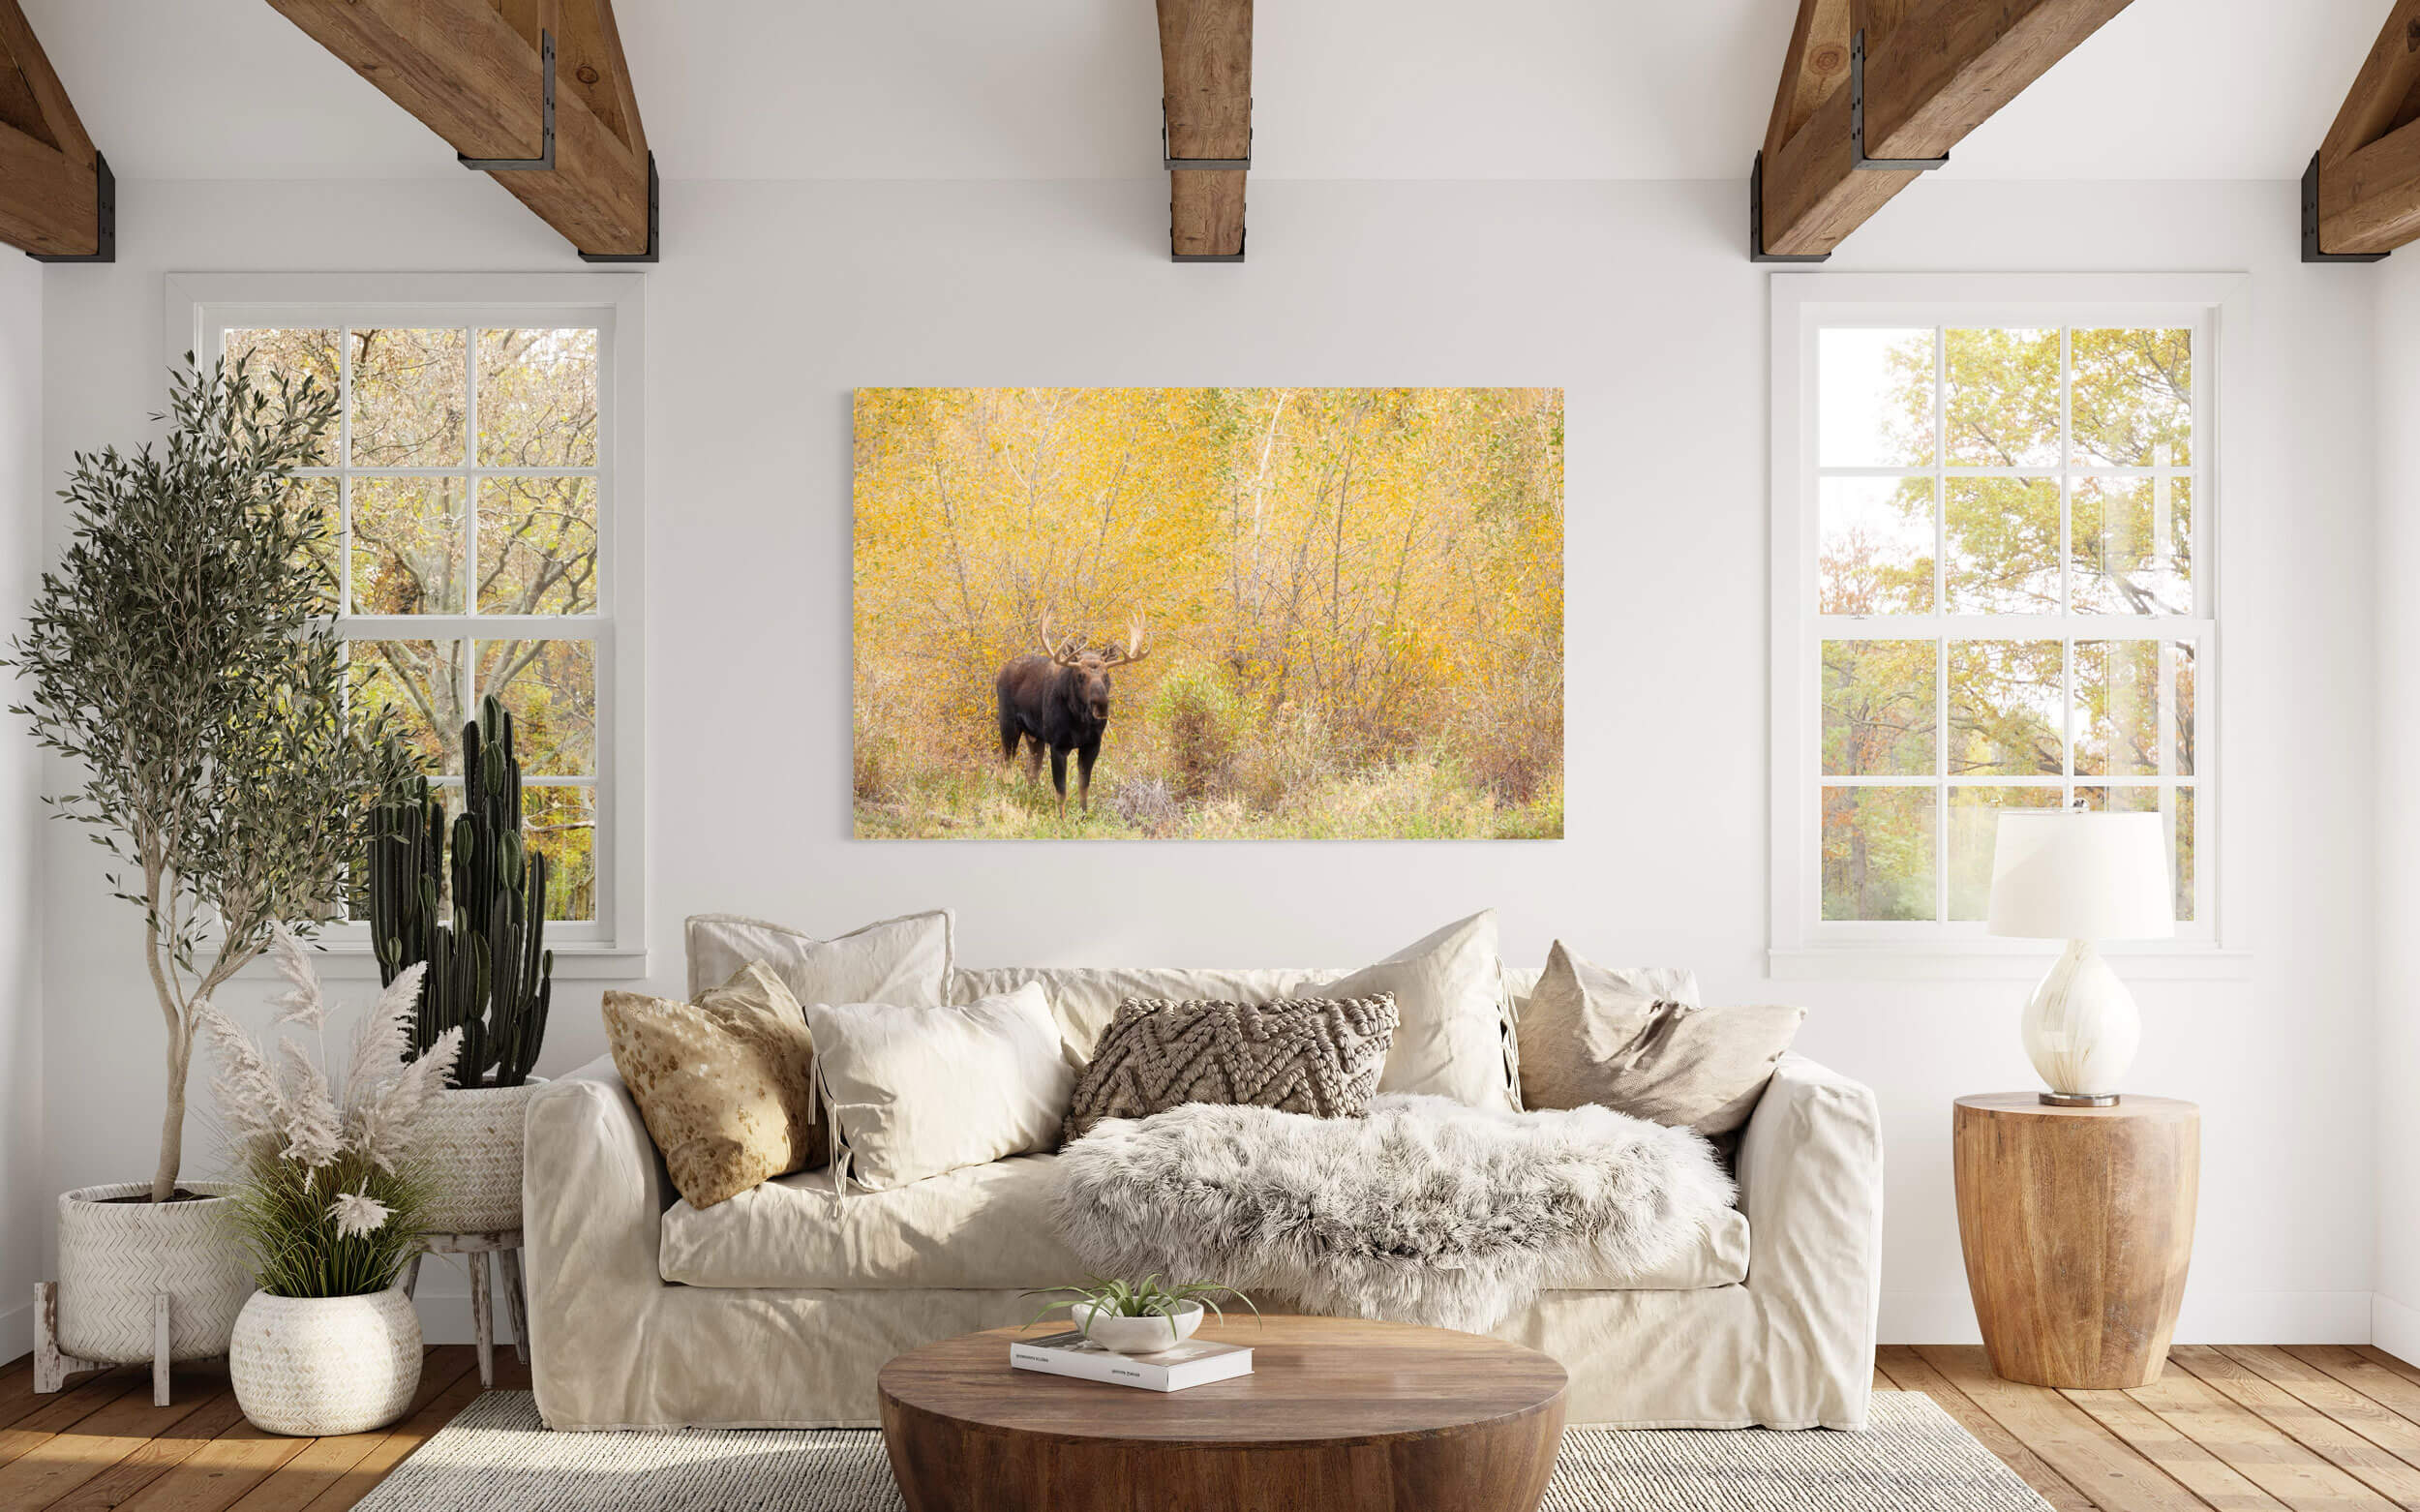 A picture of a moose during peak fall colors in Grand Teton National Park hangs in a living room.